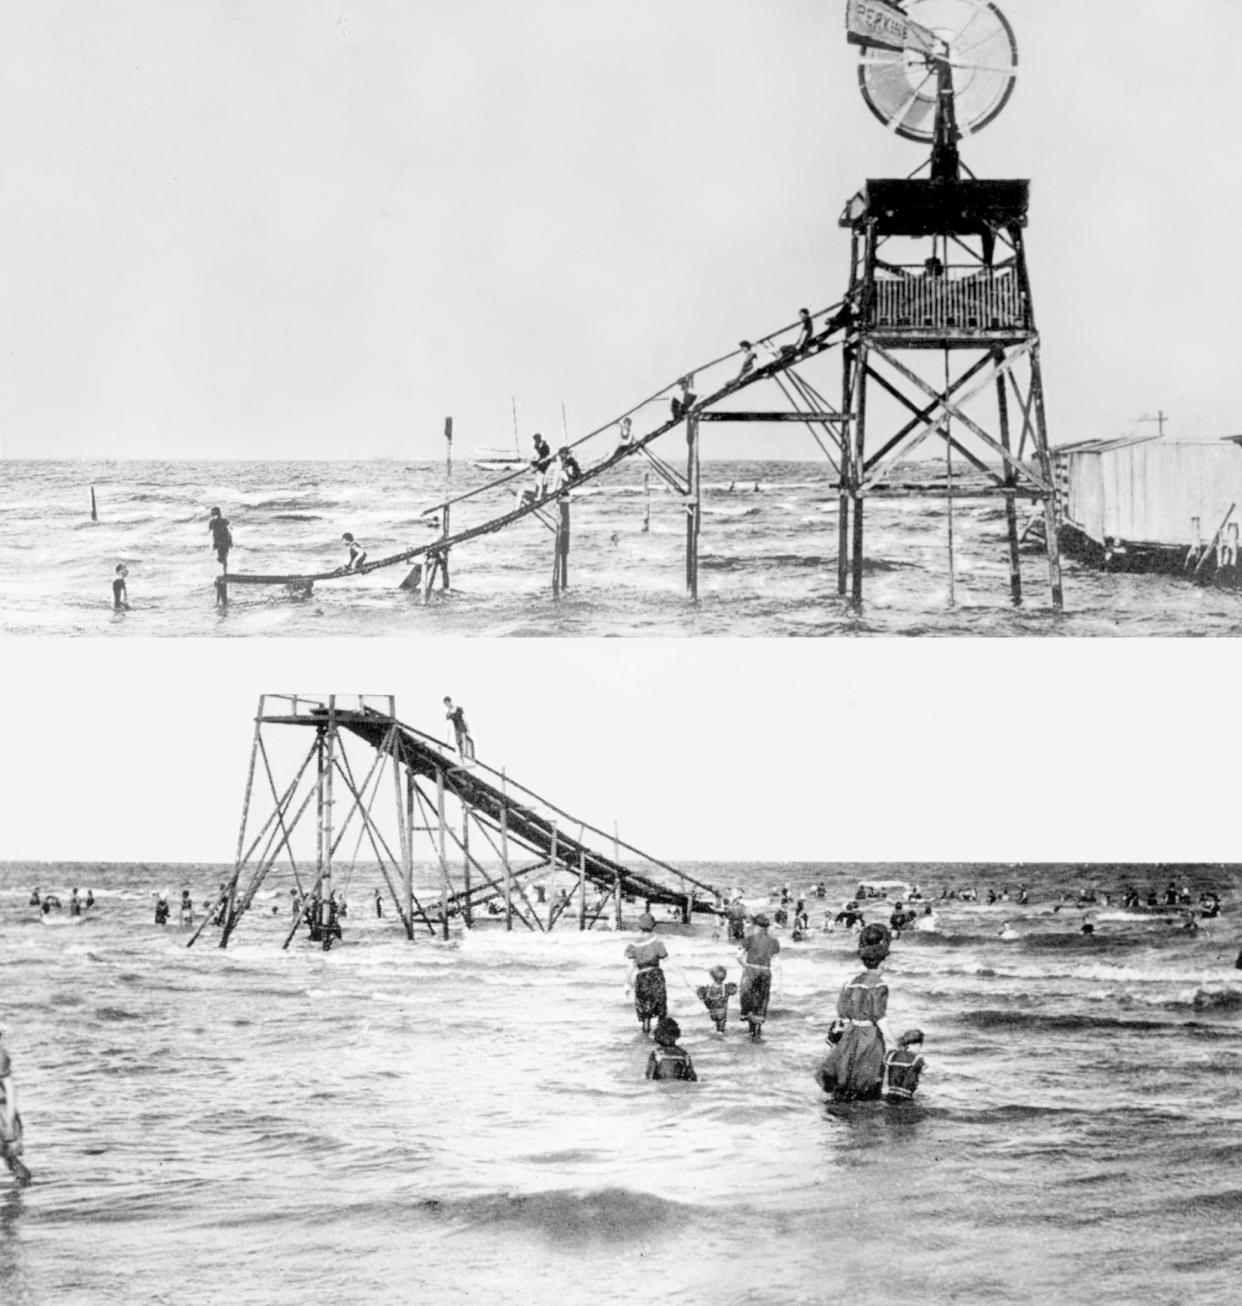 The Natatorium at the end of Twigg Street in Corpus Christi had a wind-powered water slide. In the top image, swimmers in 1908 take a ride down the slide. In the bottom image, taken in 1910, the windmill had been knocked out by a storm. The Natatorium, along with many other bayfront piers and pavilions, was destroyed by the 1916 hurricane.